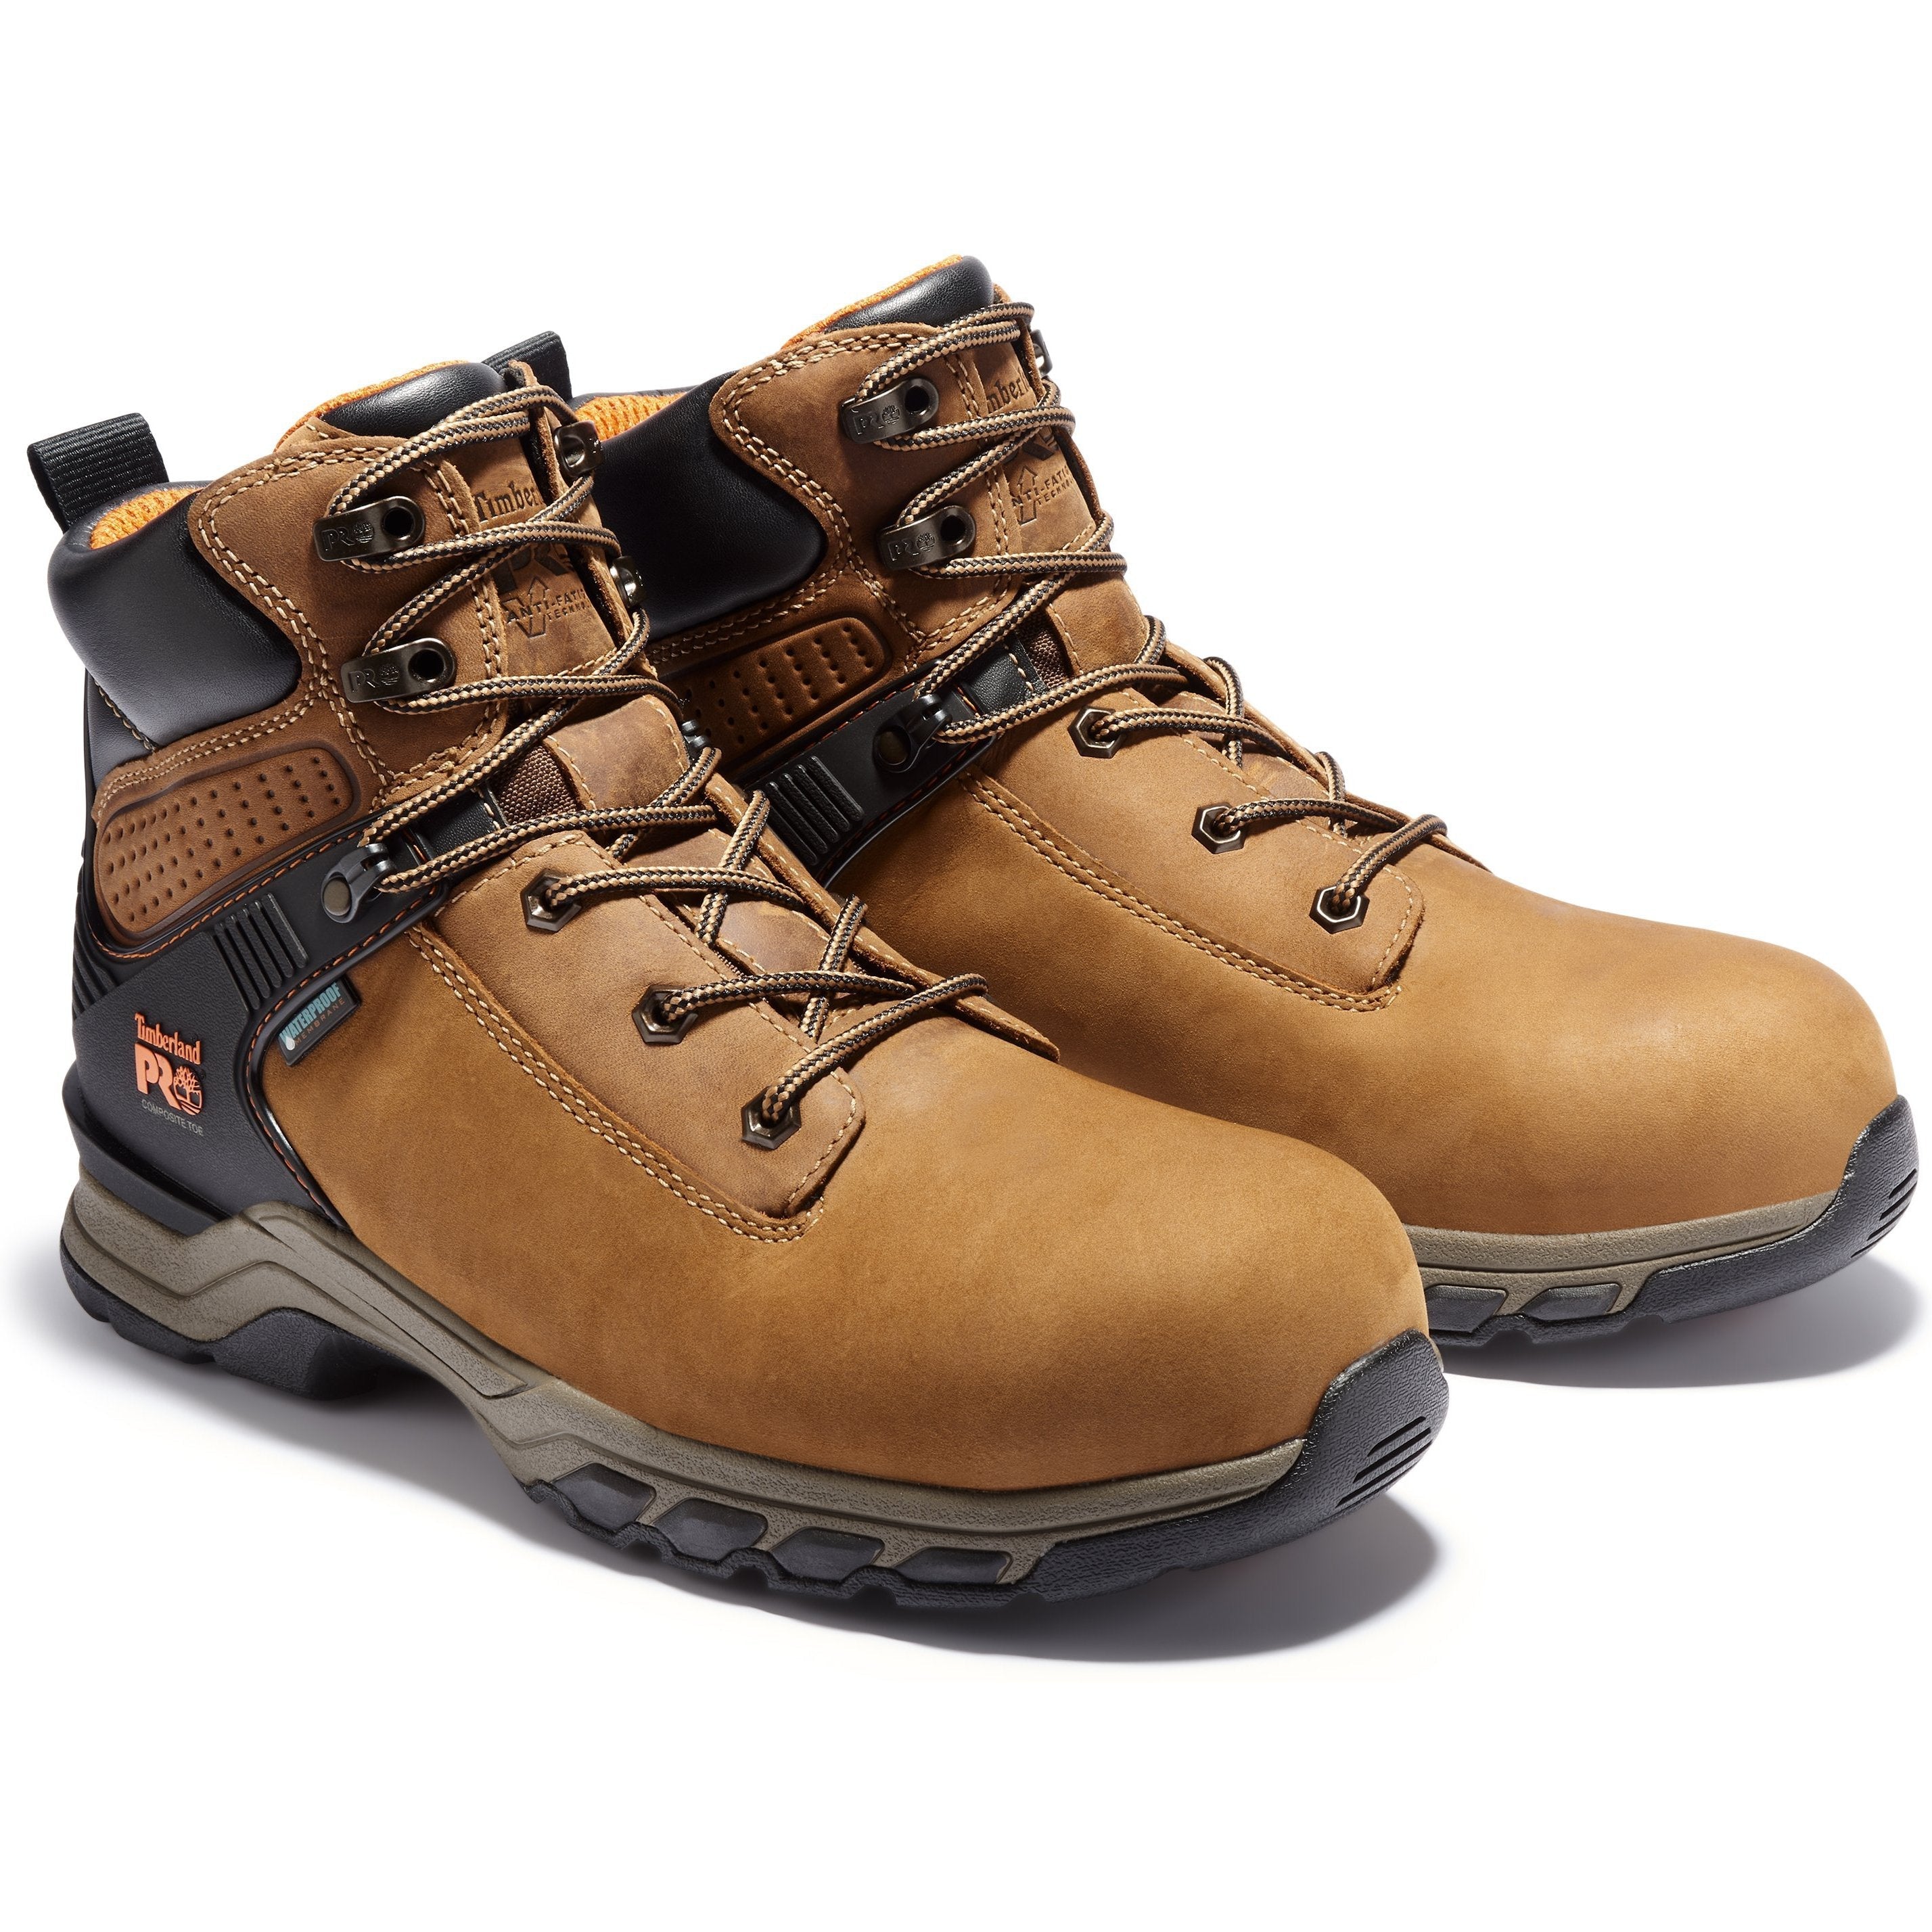 Timberland PRO Men's Hypercharge 6" Comp Toe WP Work Boot TB1A1RVS214 8.5 / Medium / Brown - Overlook Boots